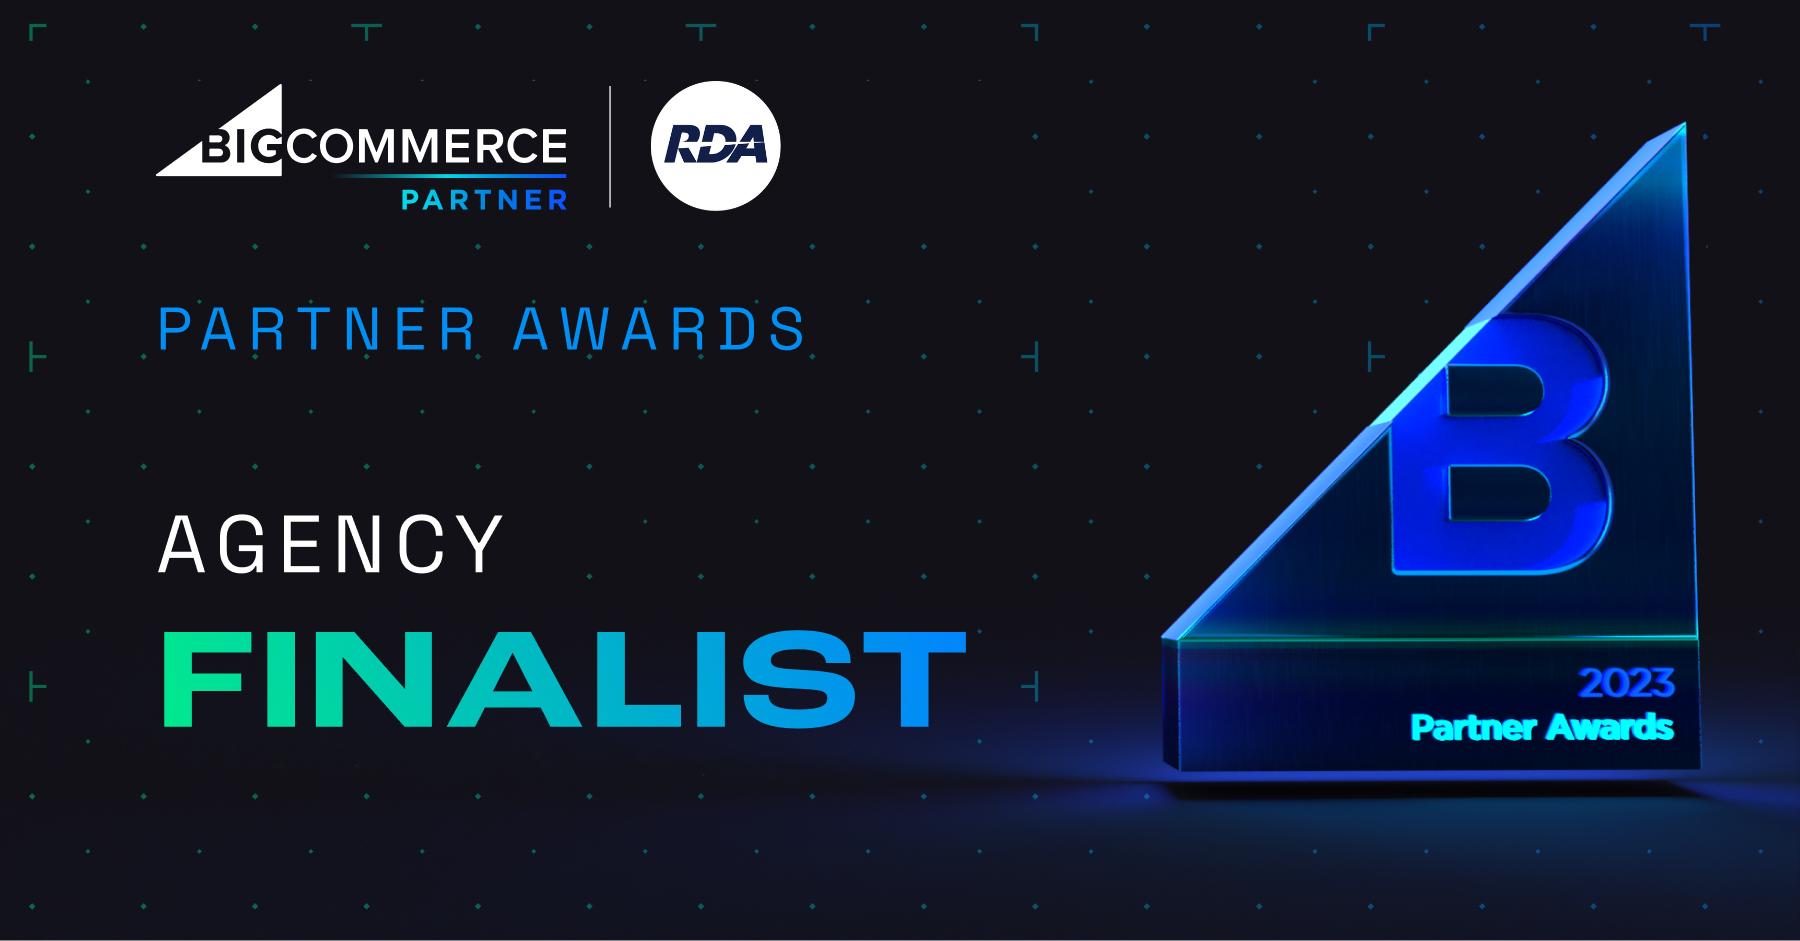 RDA Recognized as a Finalist for the 2023 BigCommerce Partner Awards